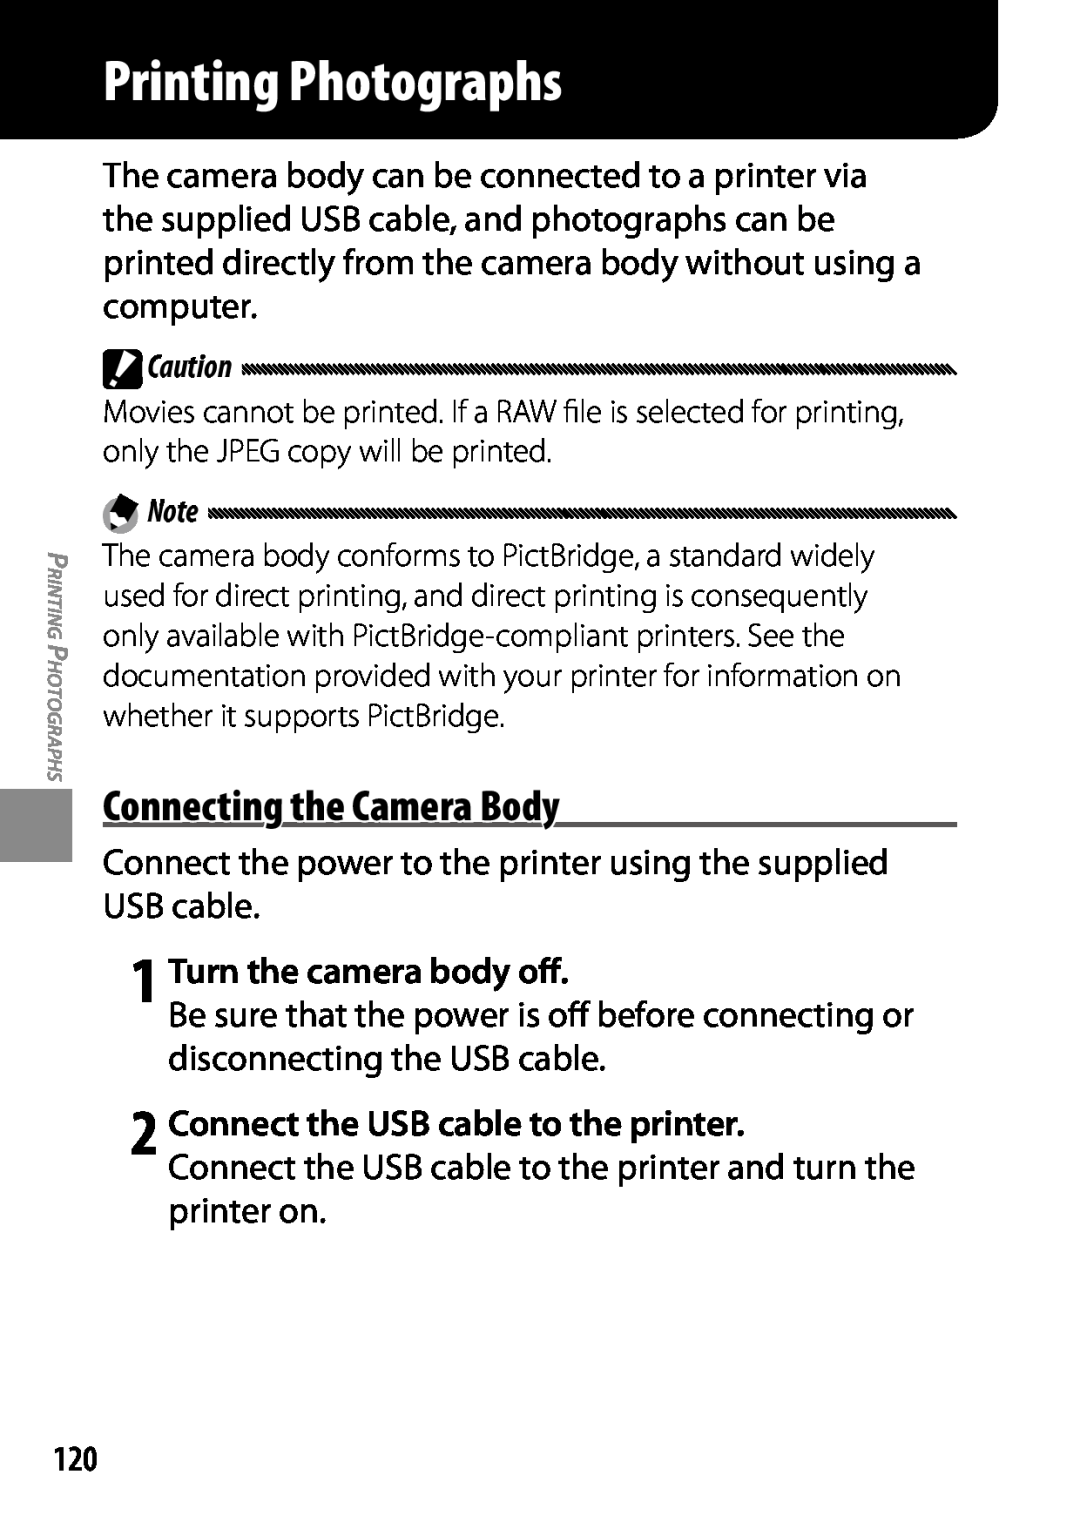 Ricoh GXR, 170543, 170553 manual Printing Photographs, Connecting the Camera Body, 2 Connect the USB cable to the printer 